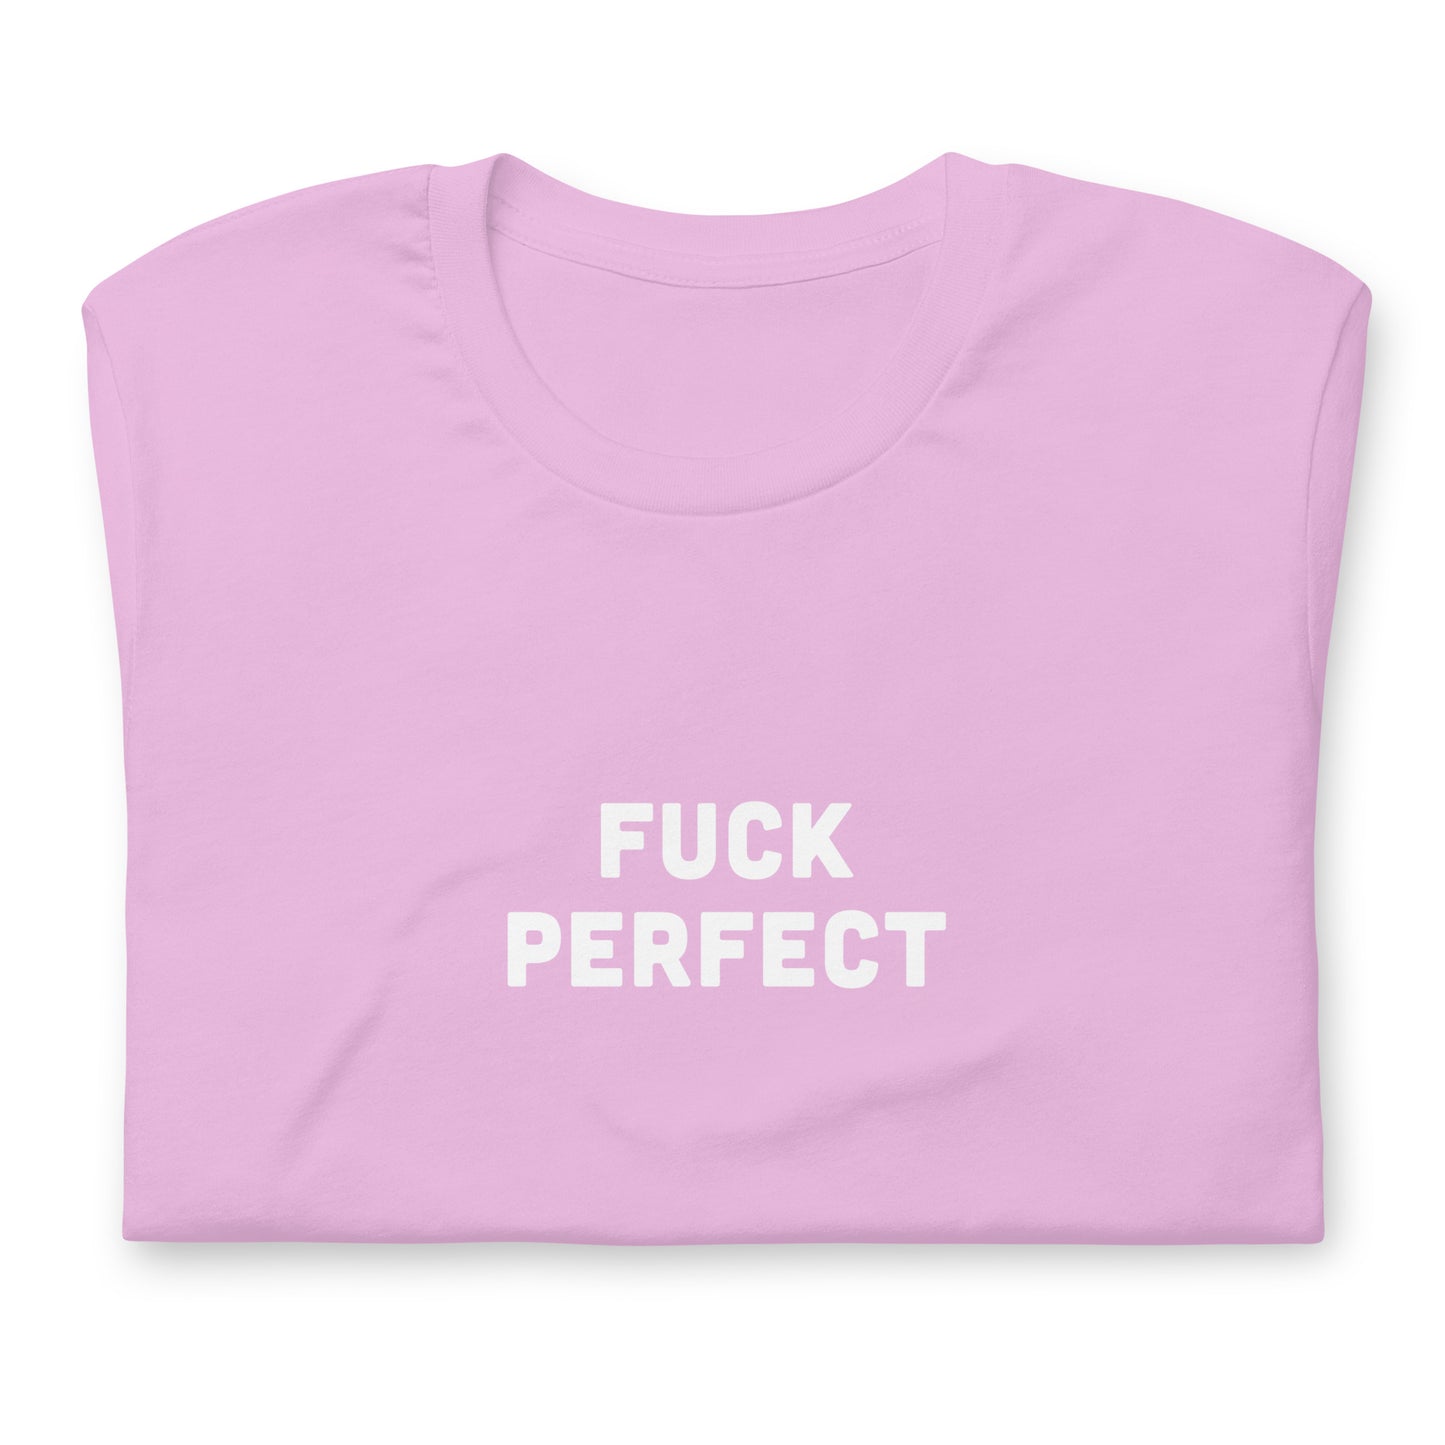 Fuck Perfect T-Shirt Size 2XL Color Forest